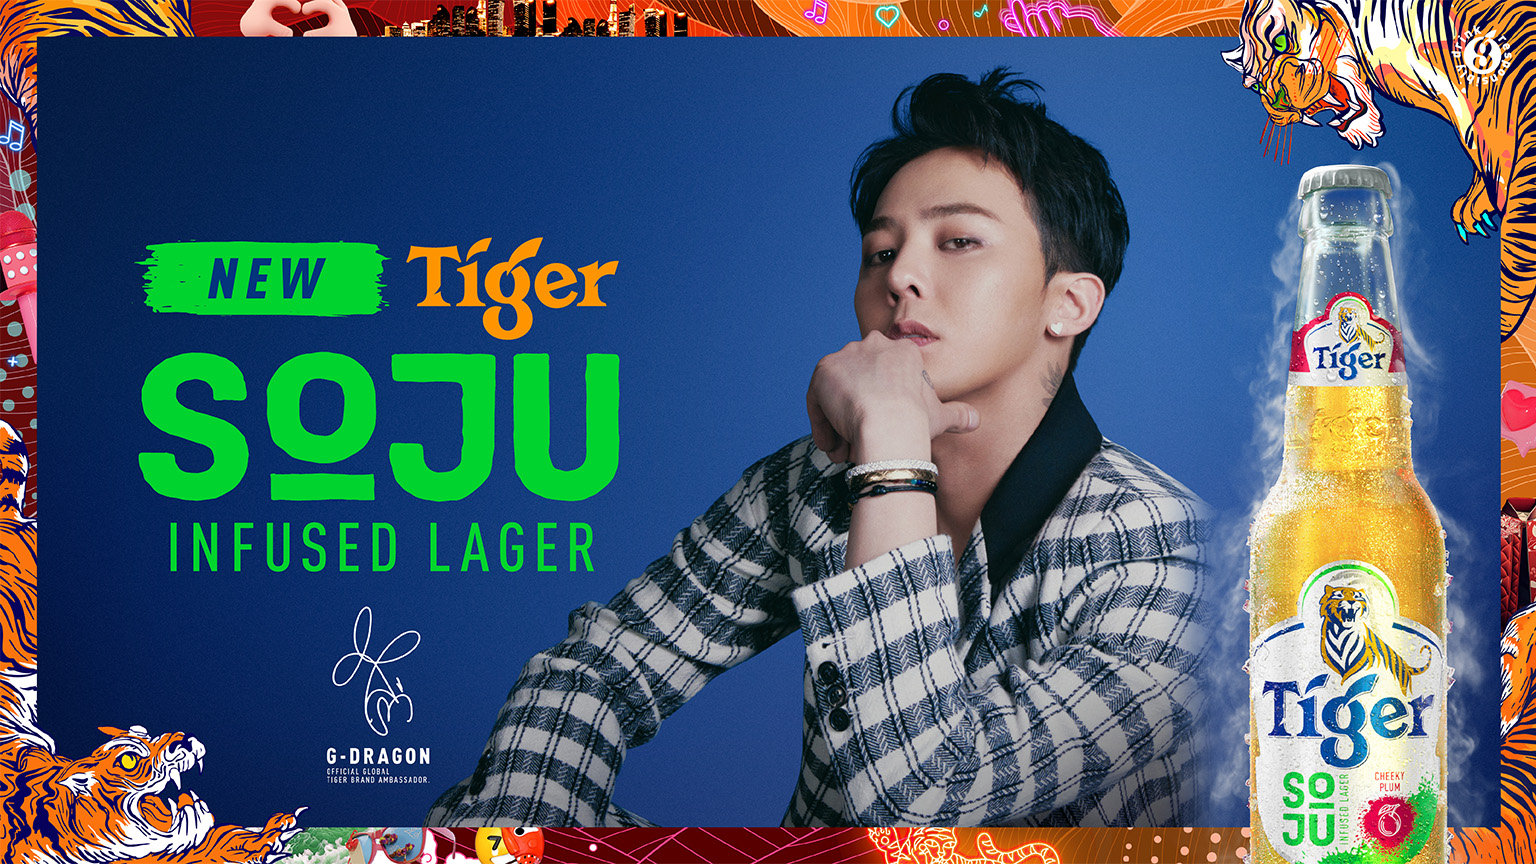 Food Navigator Asia: A toast to innovation – Tiger breaks beer-making boundaries to keep up with ‘sessionable and accessible’ drinking trends